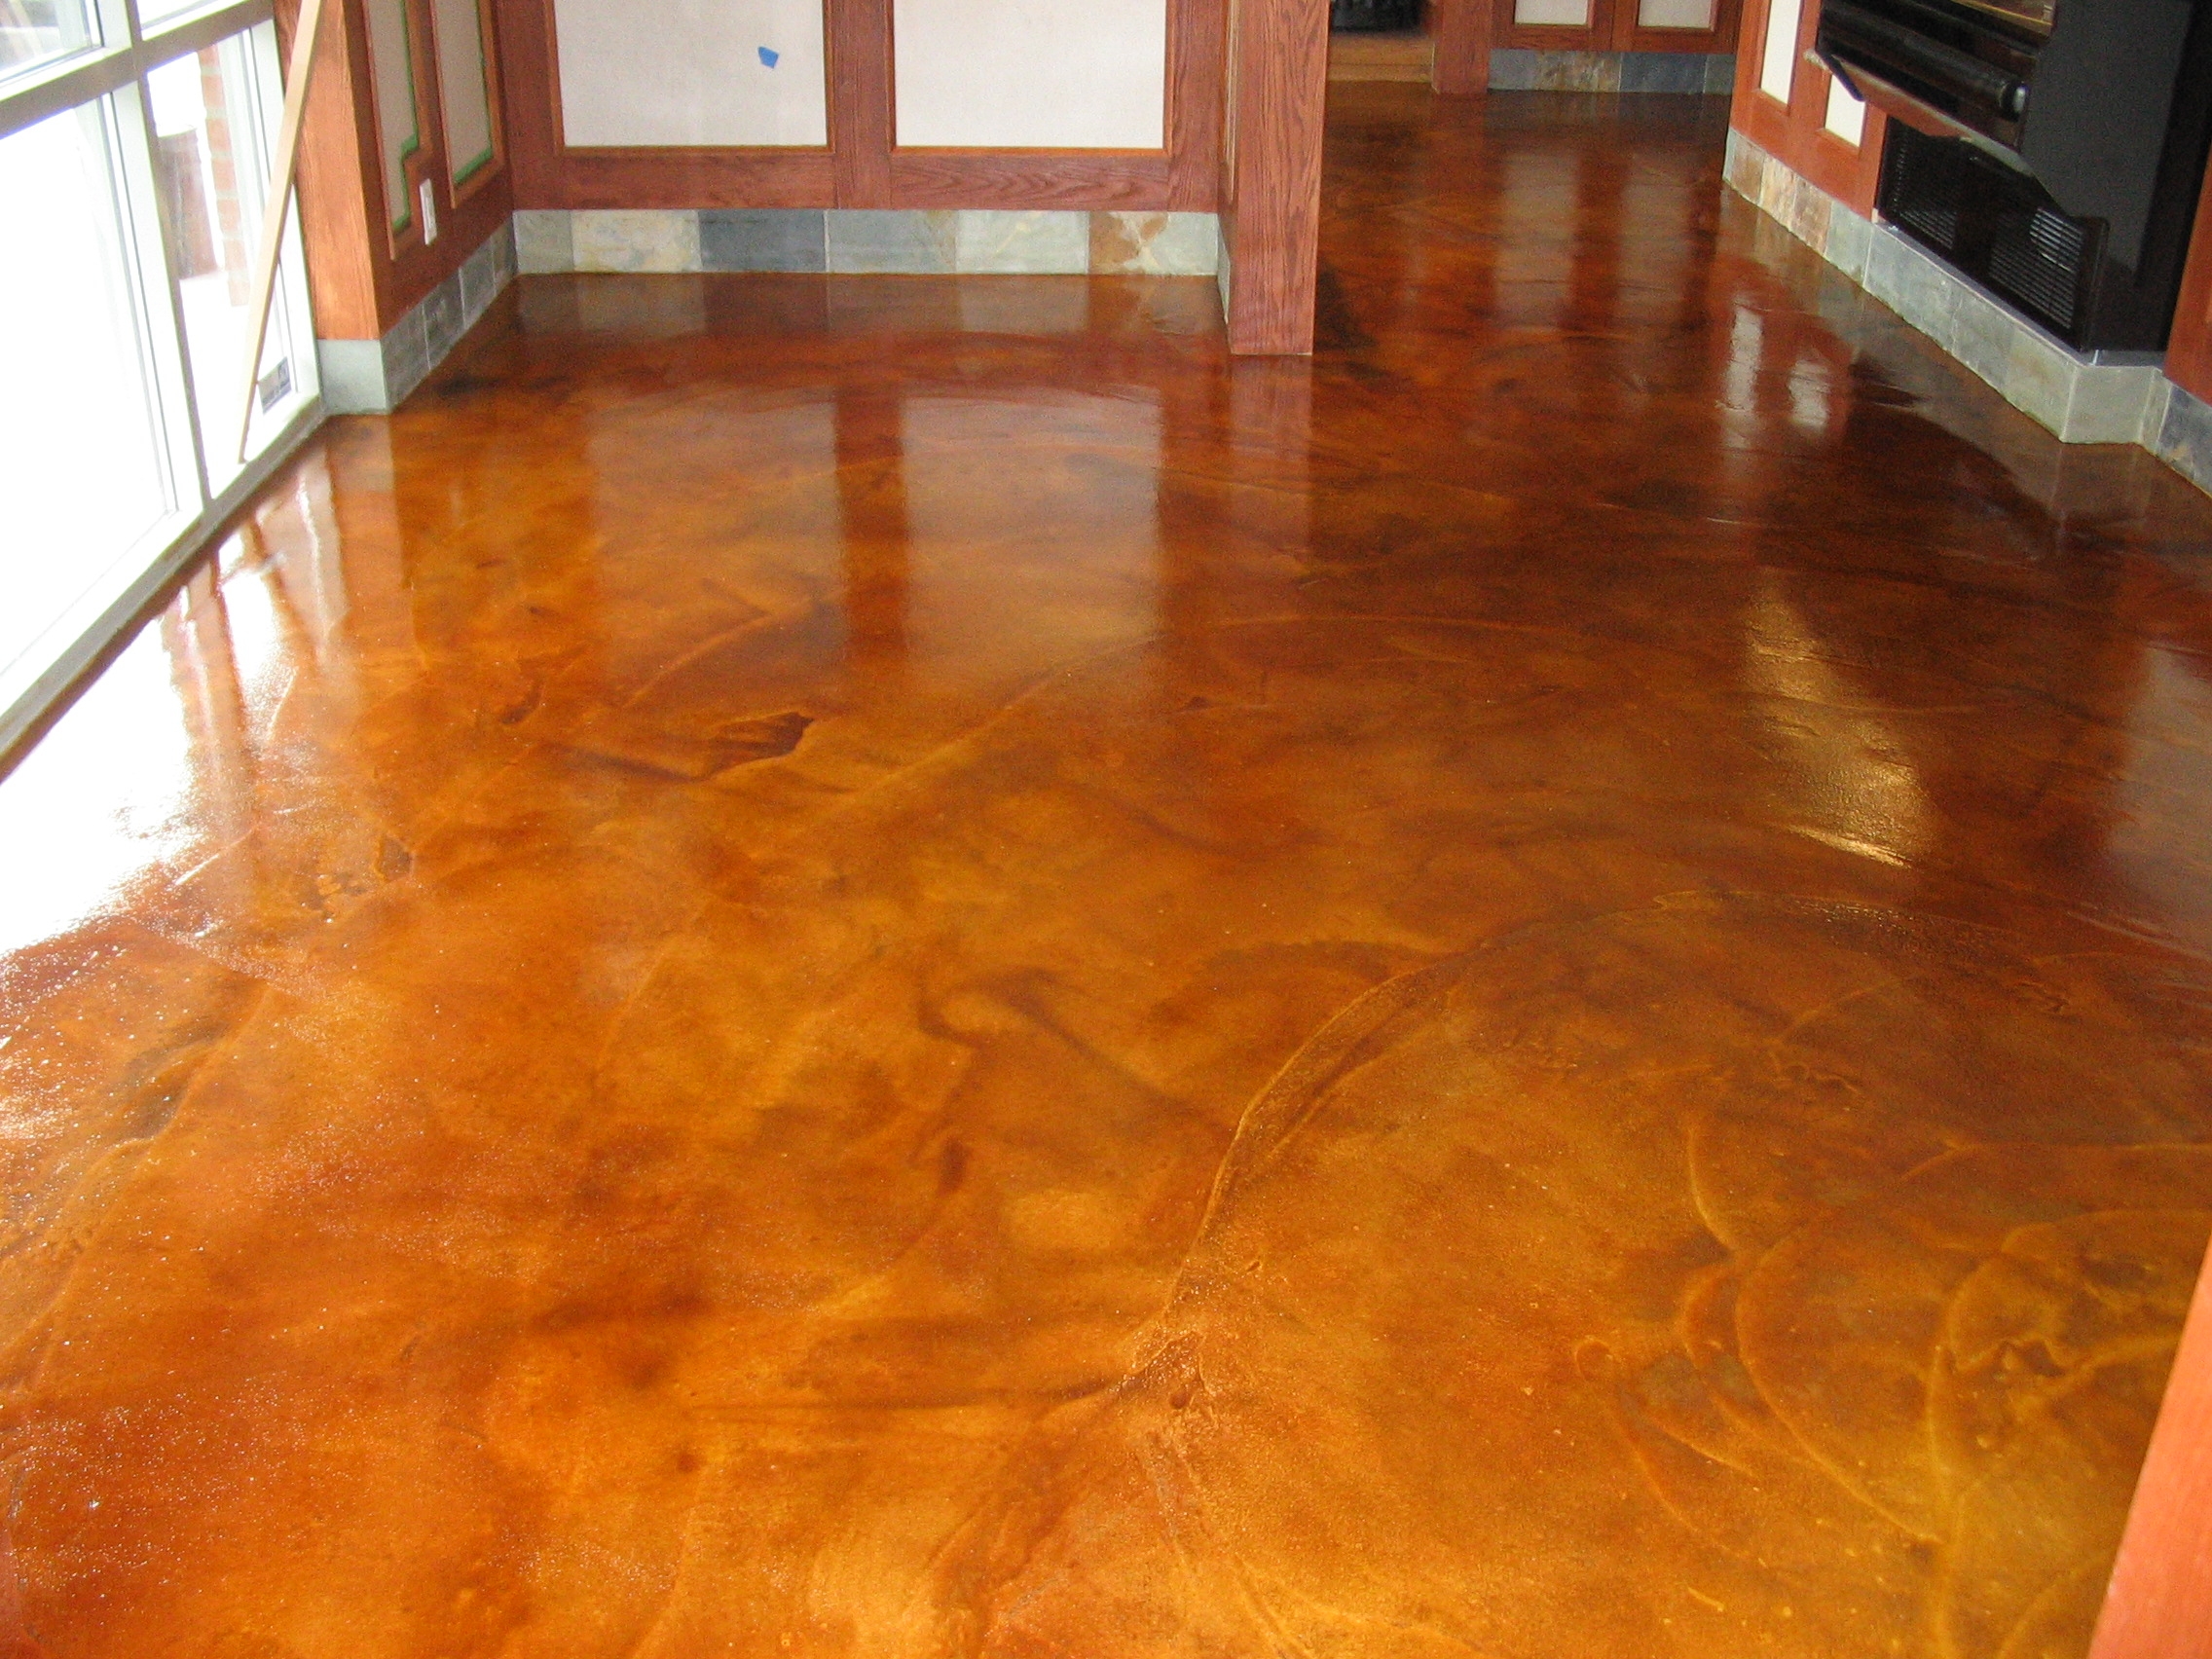 Brown Color Painting Concrete Floor Inside House In The Hallway